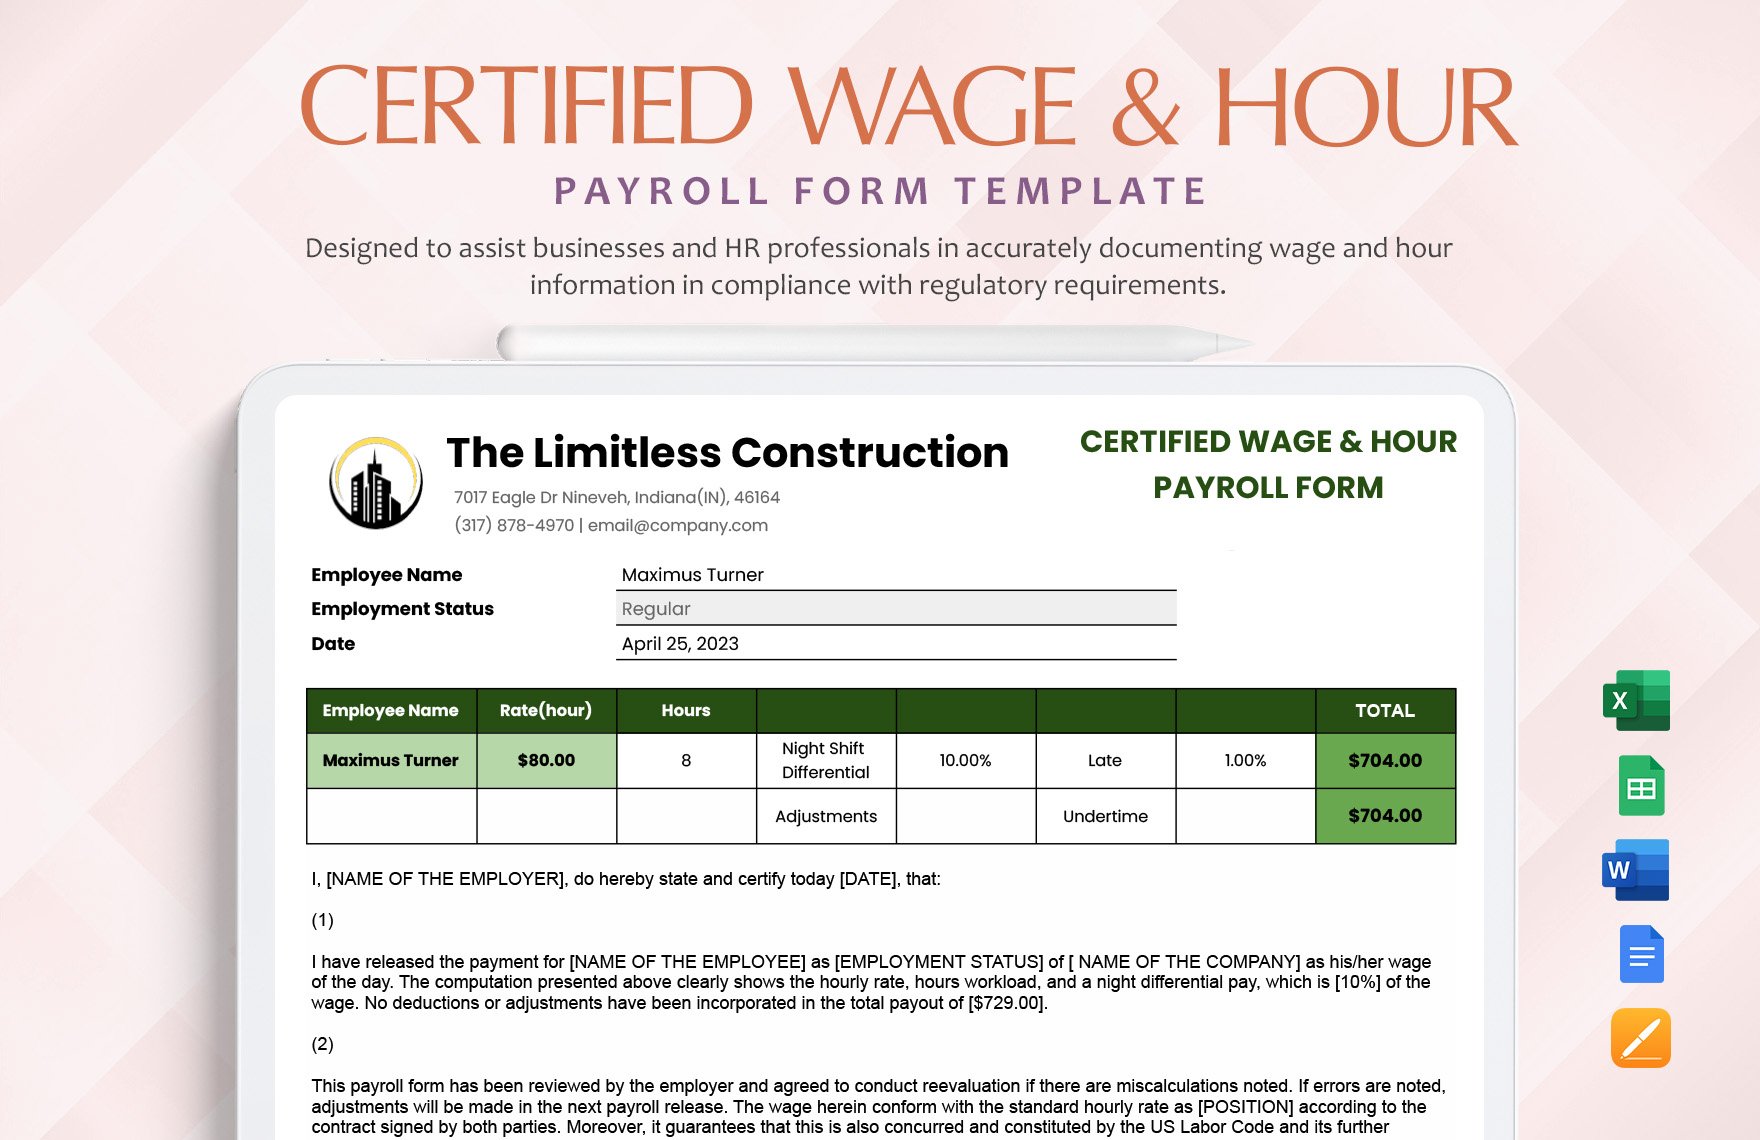 Certified Wage & Hour Payroll Form Template